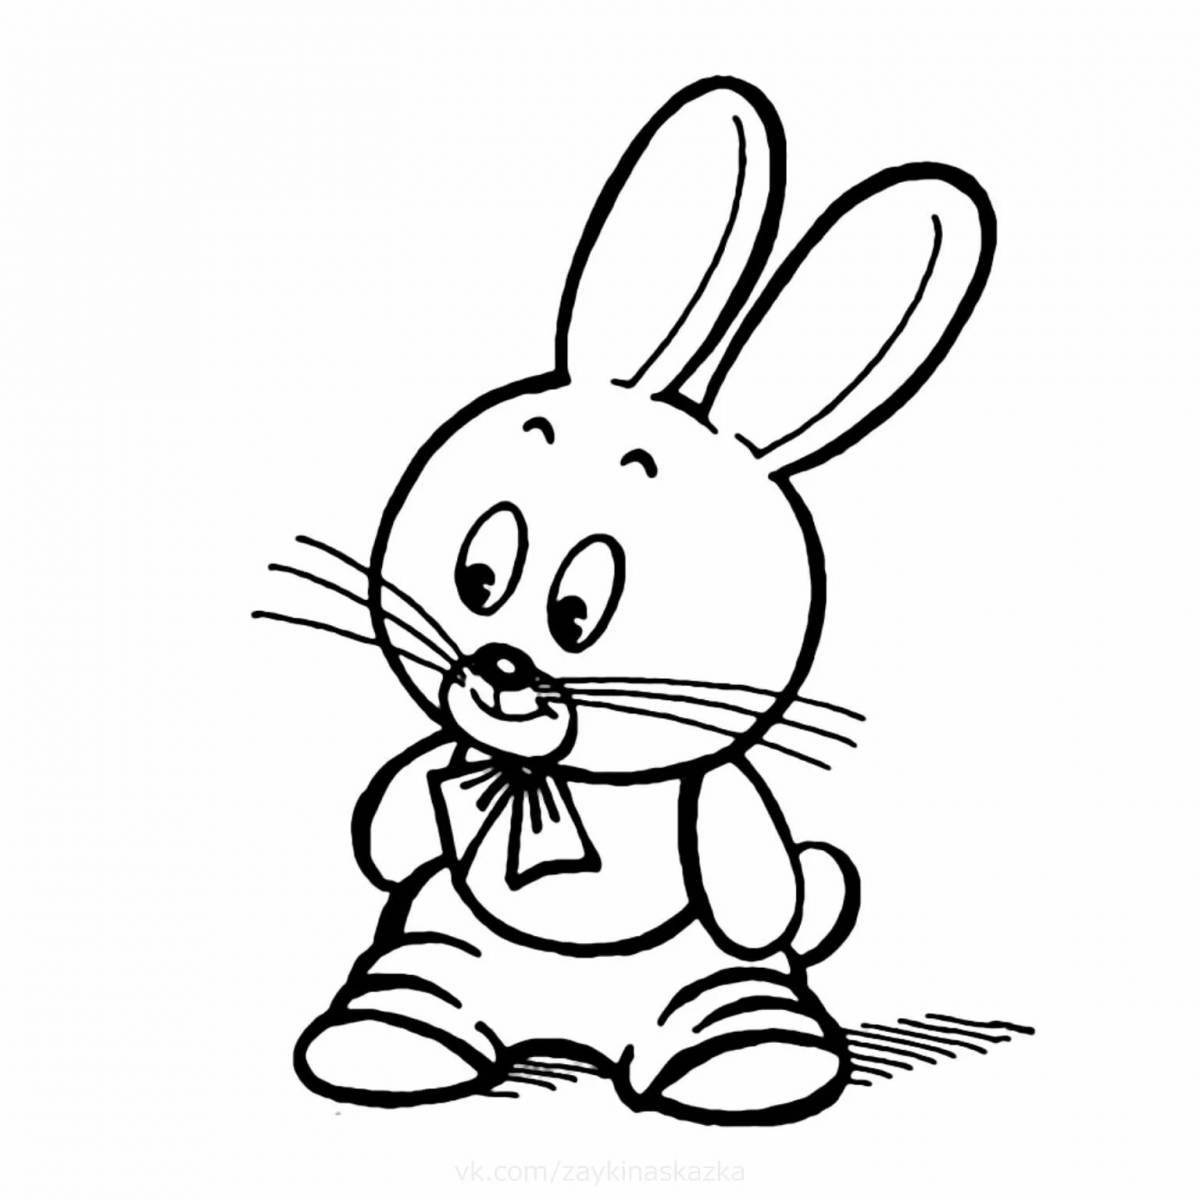 Joyful bunny coloring book for 2 year olds